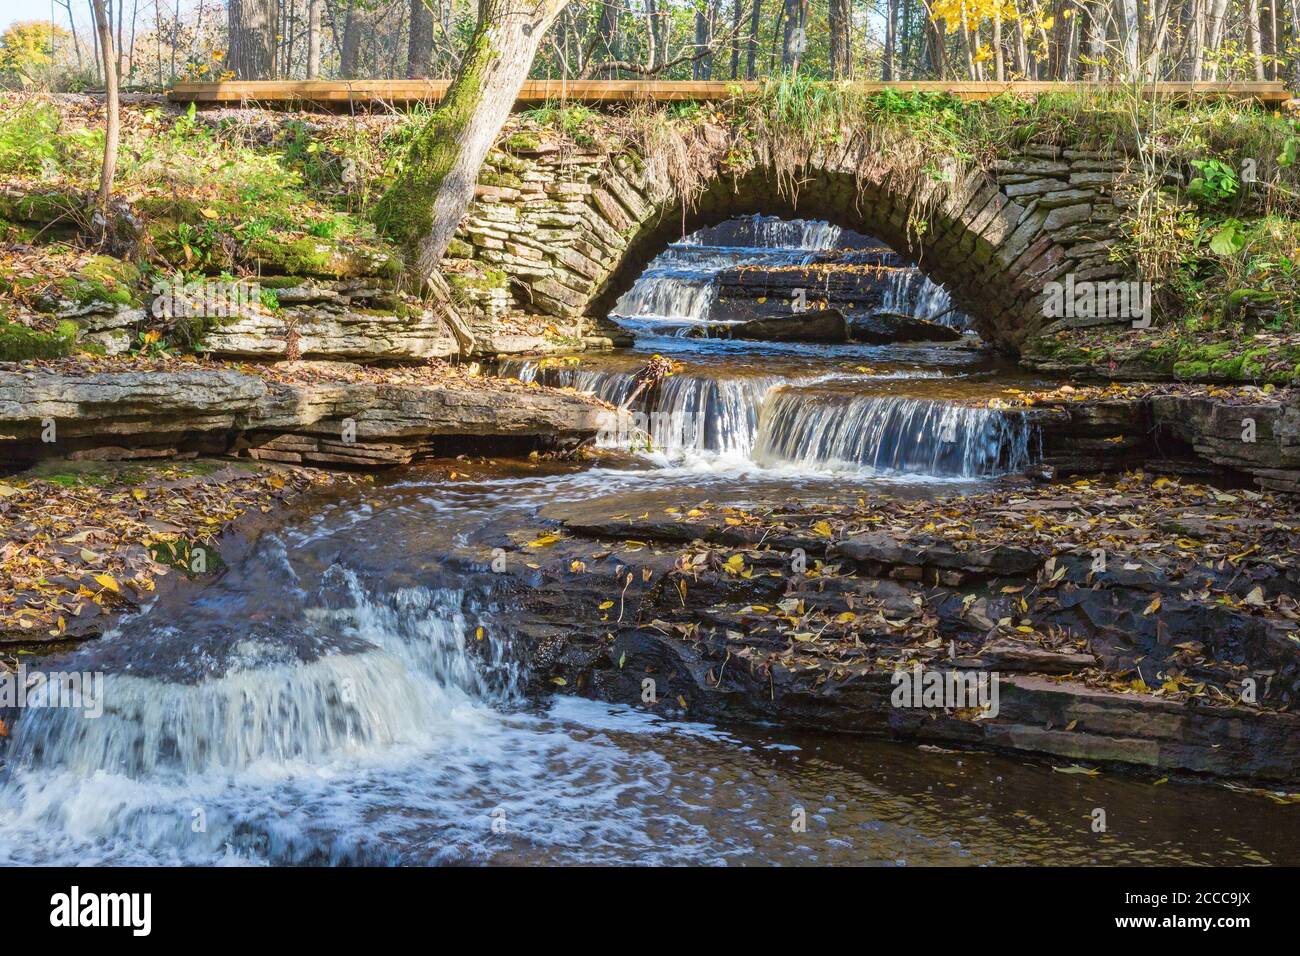 Old arch bridge over a stream with waterfalls Stock Photo - Alamy